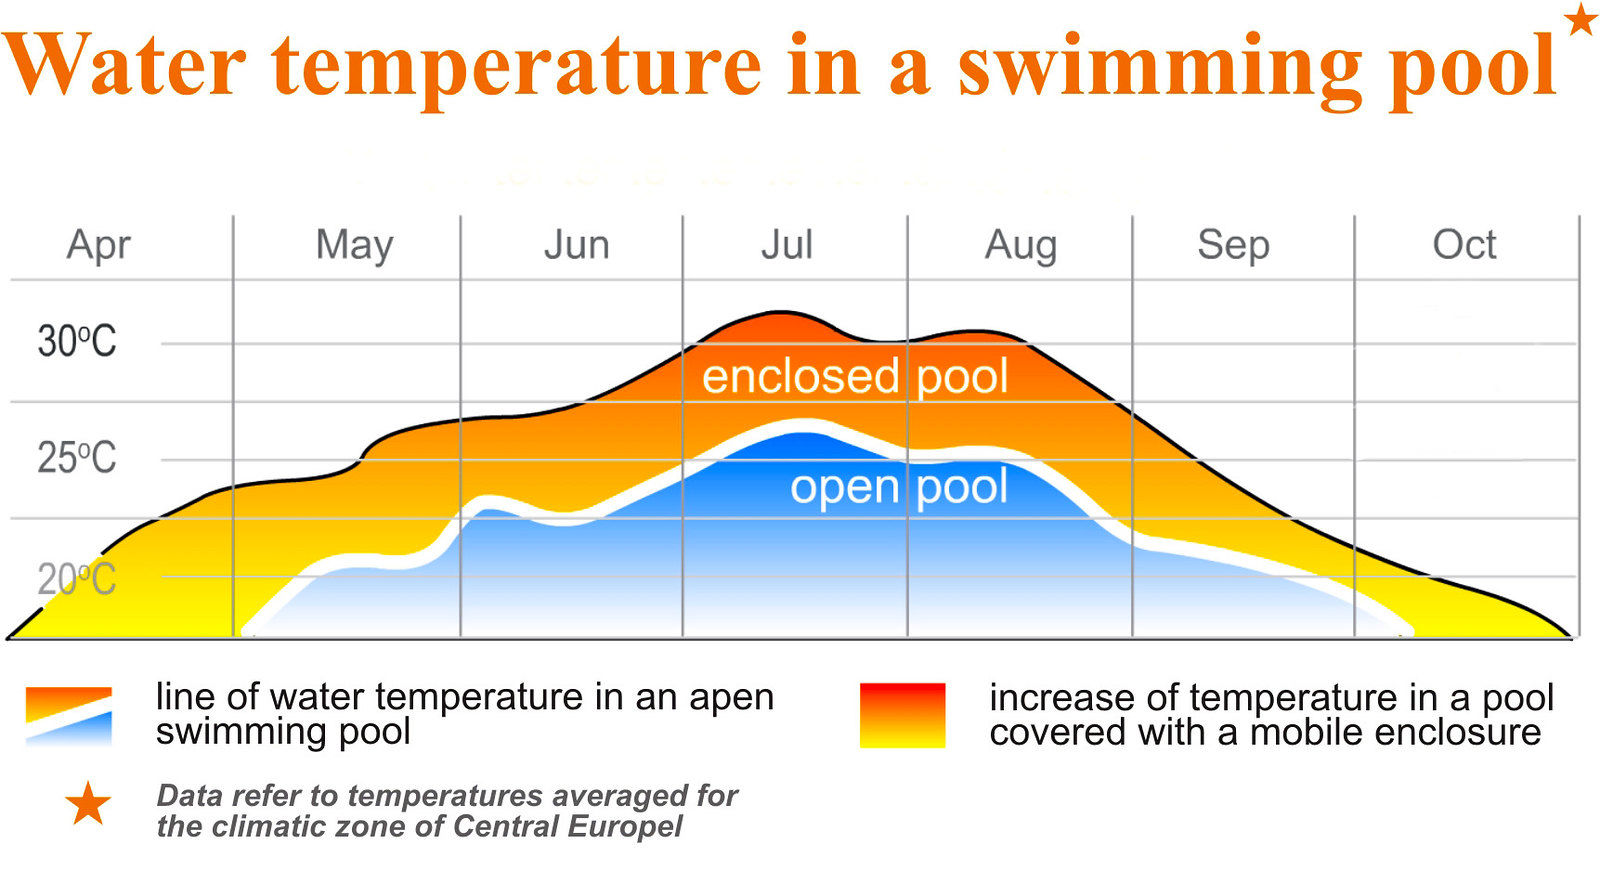 Water temperature in a swimming pool